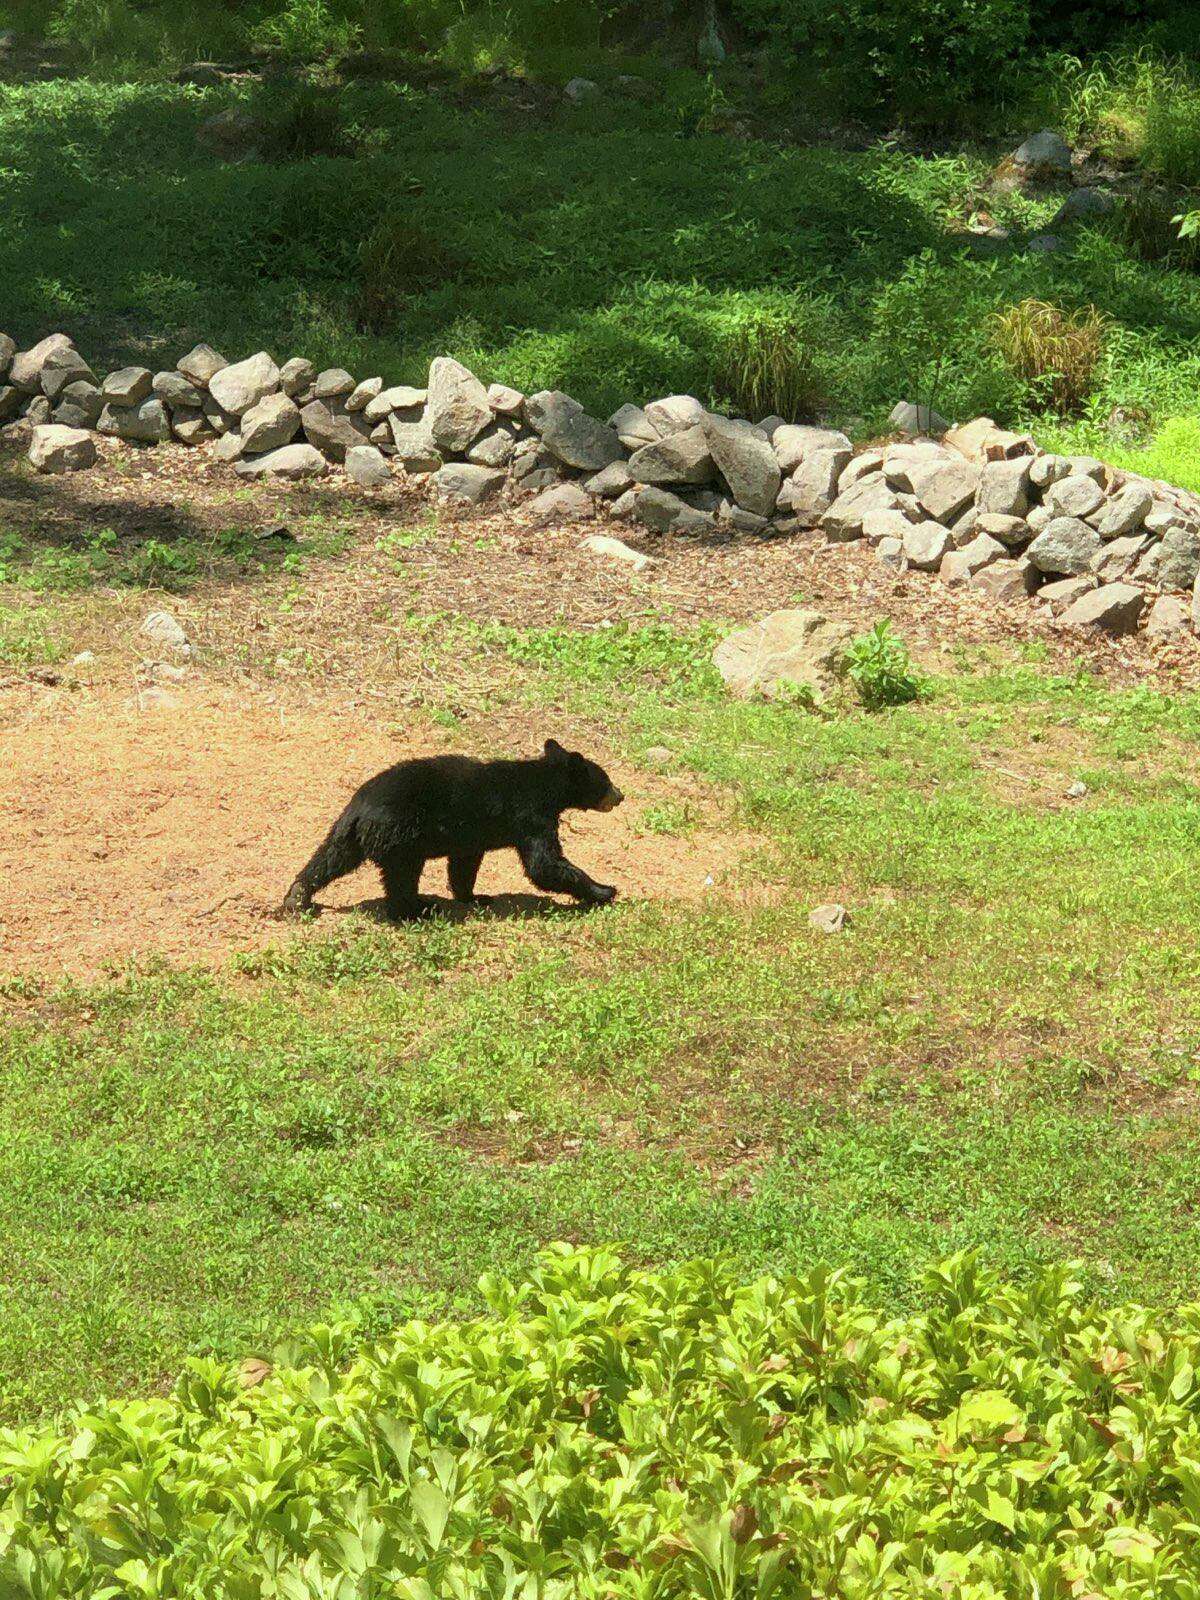 A baby bear is in the backyard of New Canaan resident Susan Serven's nextdoor neighbor's backyard at 174 Mariomi Road in New Canaan Friday, afternoon, June 26, 2020. Serven's nextdoor neighbors who live at the mentioned address are: John, and Jennifer Ruth. Their son, Adam took the photo. Serven then e-mailed it to the New Canaan Advertiser.